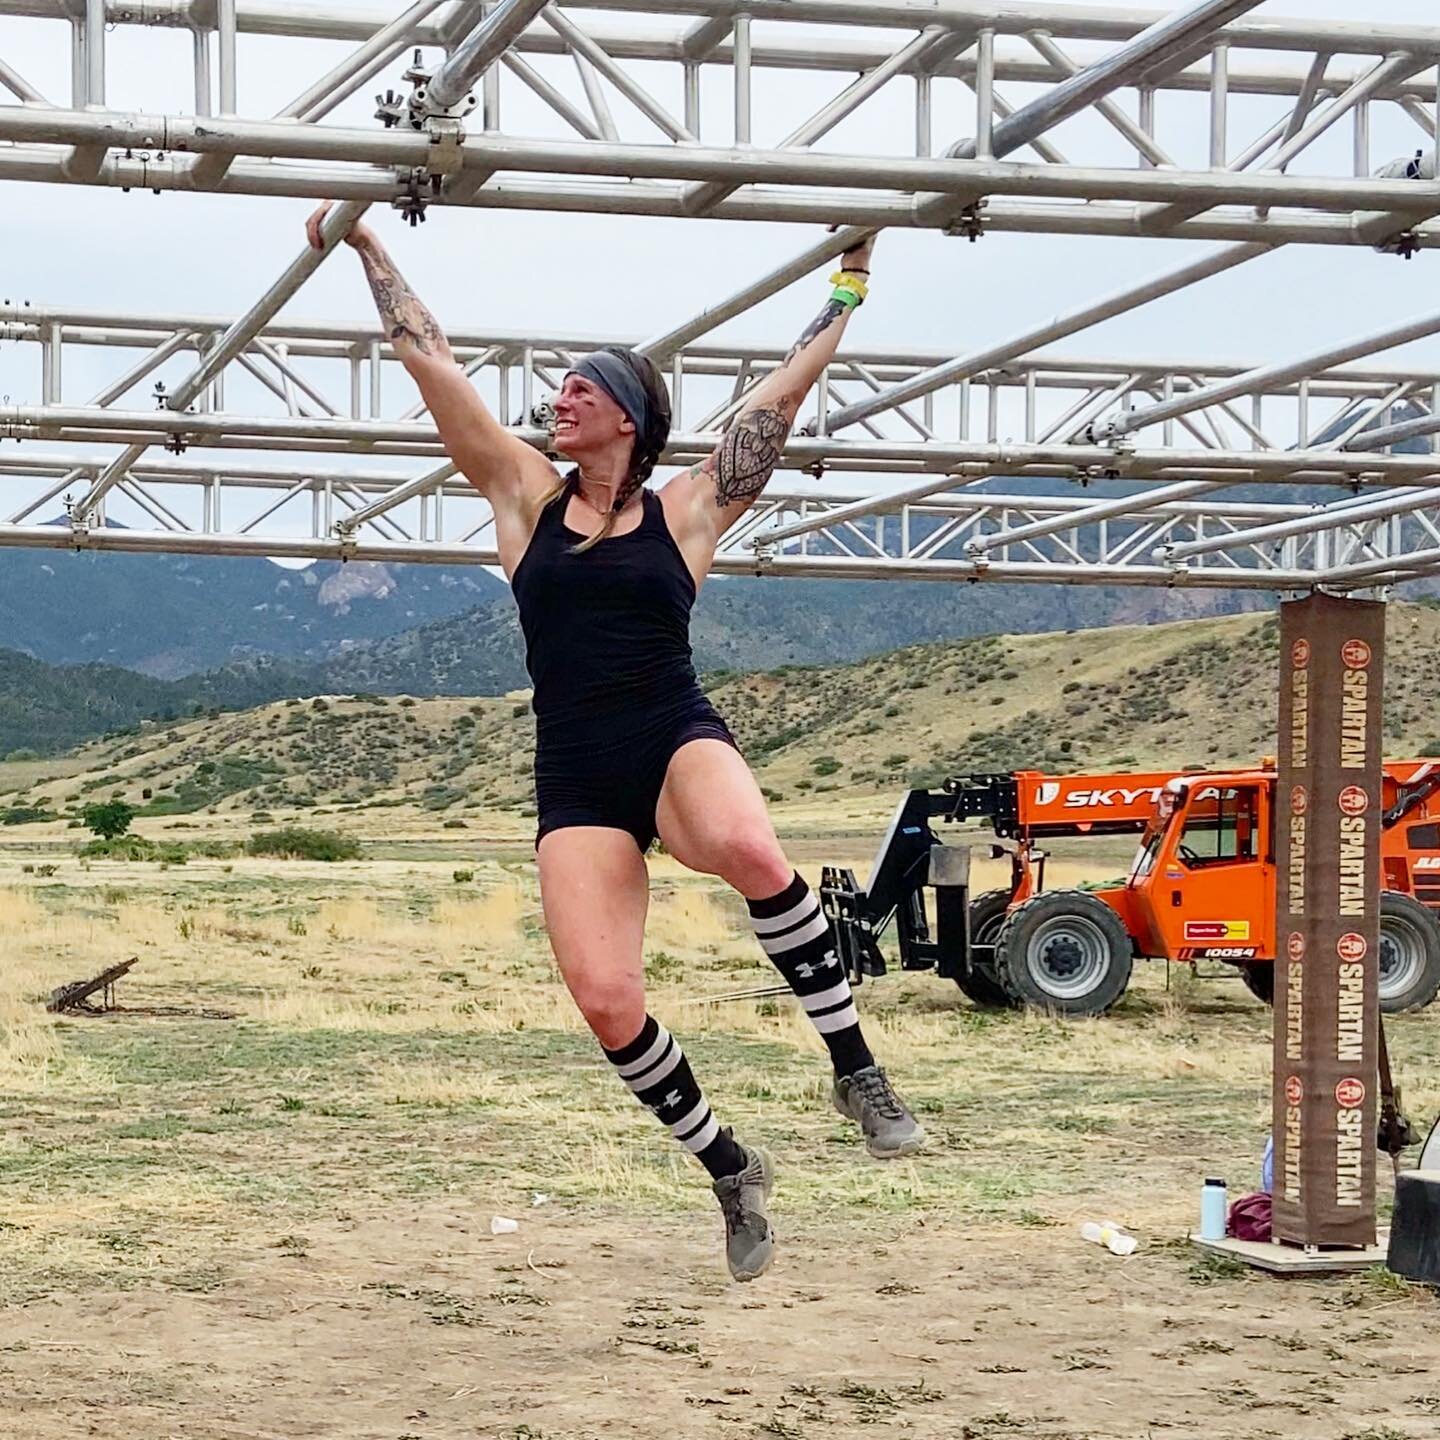 Last Sunday, I had the opportunity to run a @SpartanRace with the inspirational coaches and kiddos of @forgingyouthresilience Mindset Reps! It takes grit and determination to cover the distance, conquer the obstacles, push in the extreme heat, and he